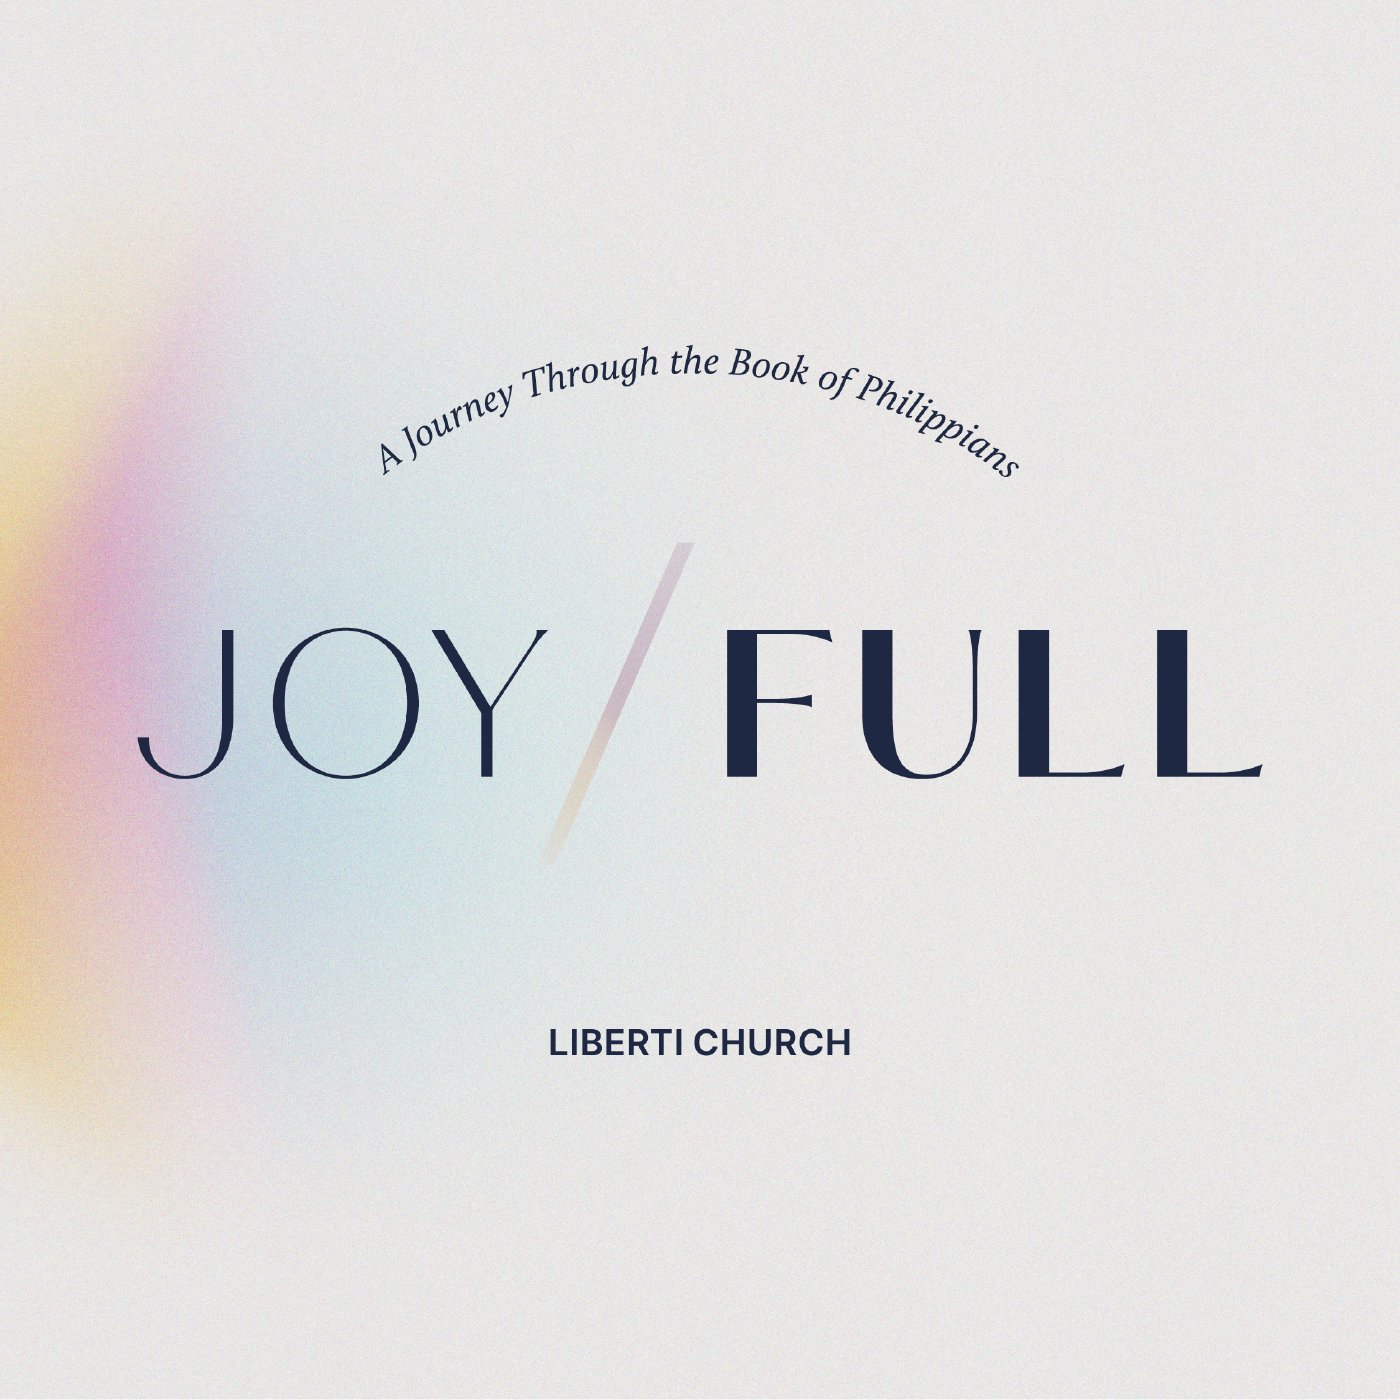 Joy/Full - A Life Worth Living (and a Death Worth Dying) - Week 3